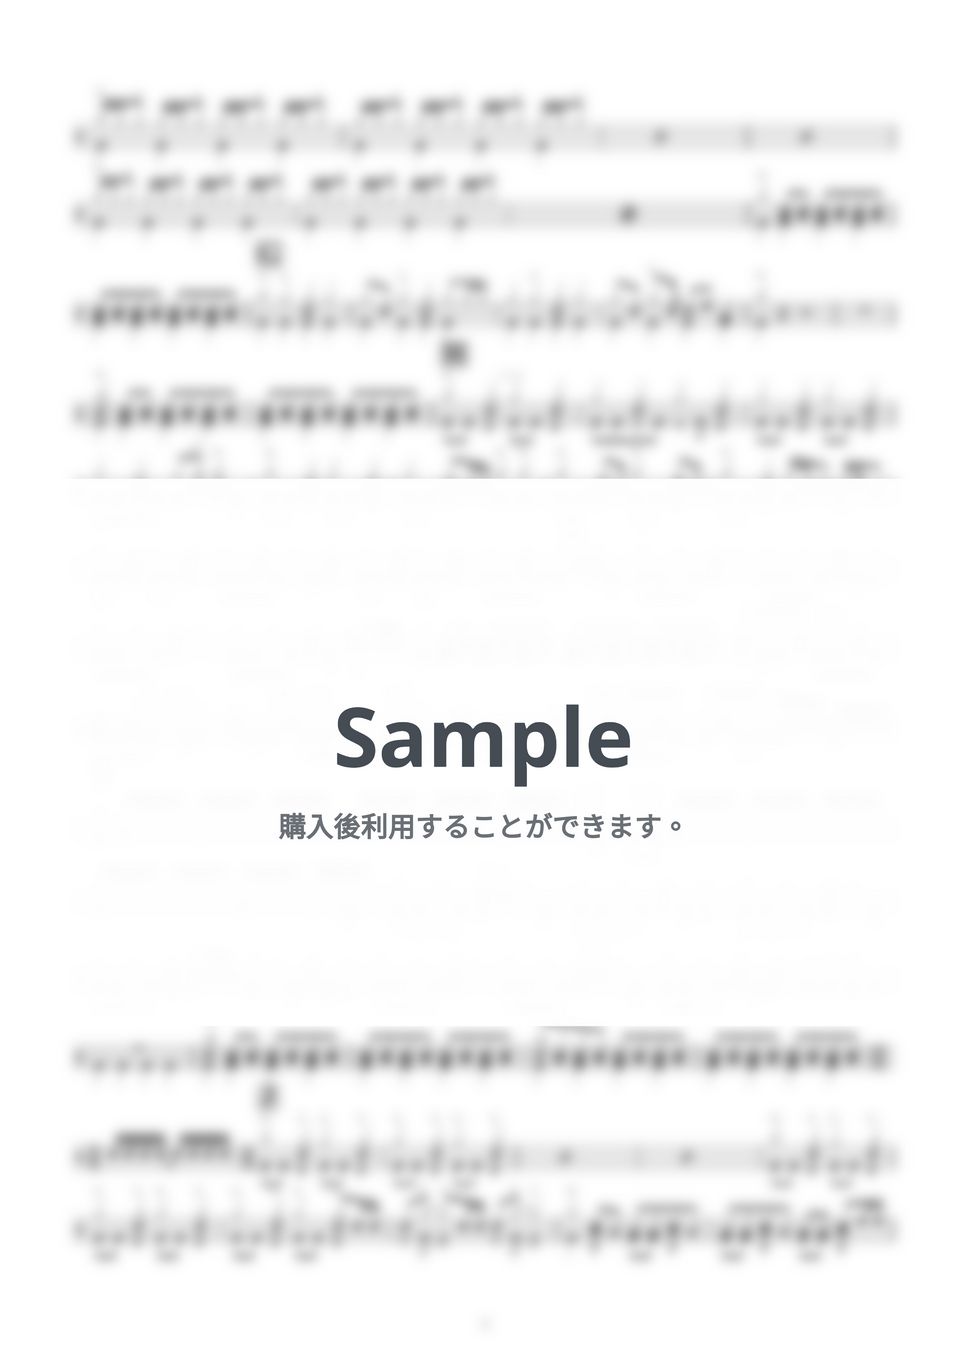 supercell - 君の知らない物語 (DRUM SCORE) by ONEDRUMS